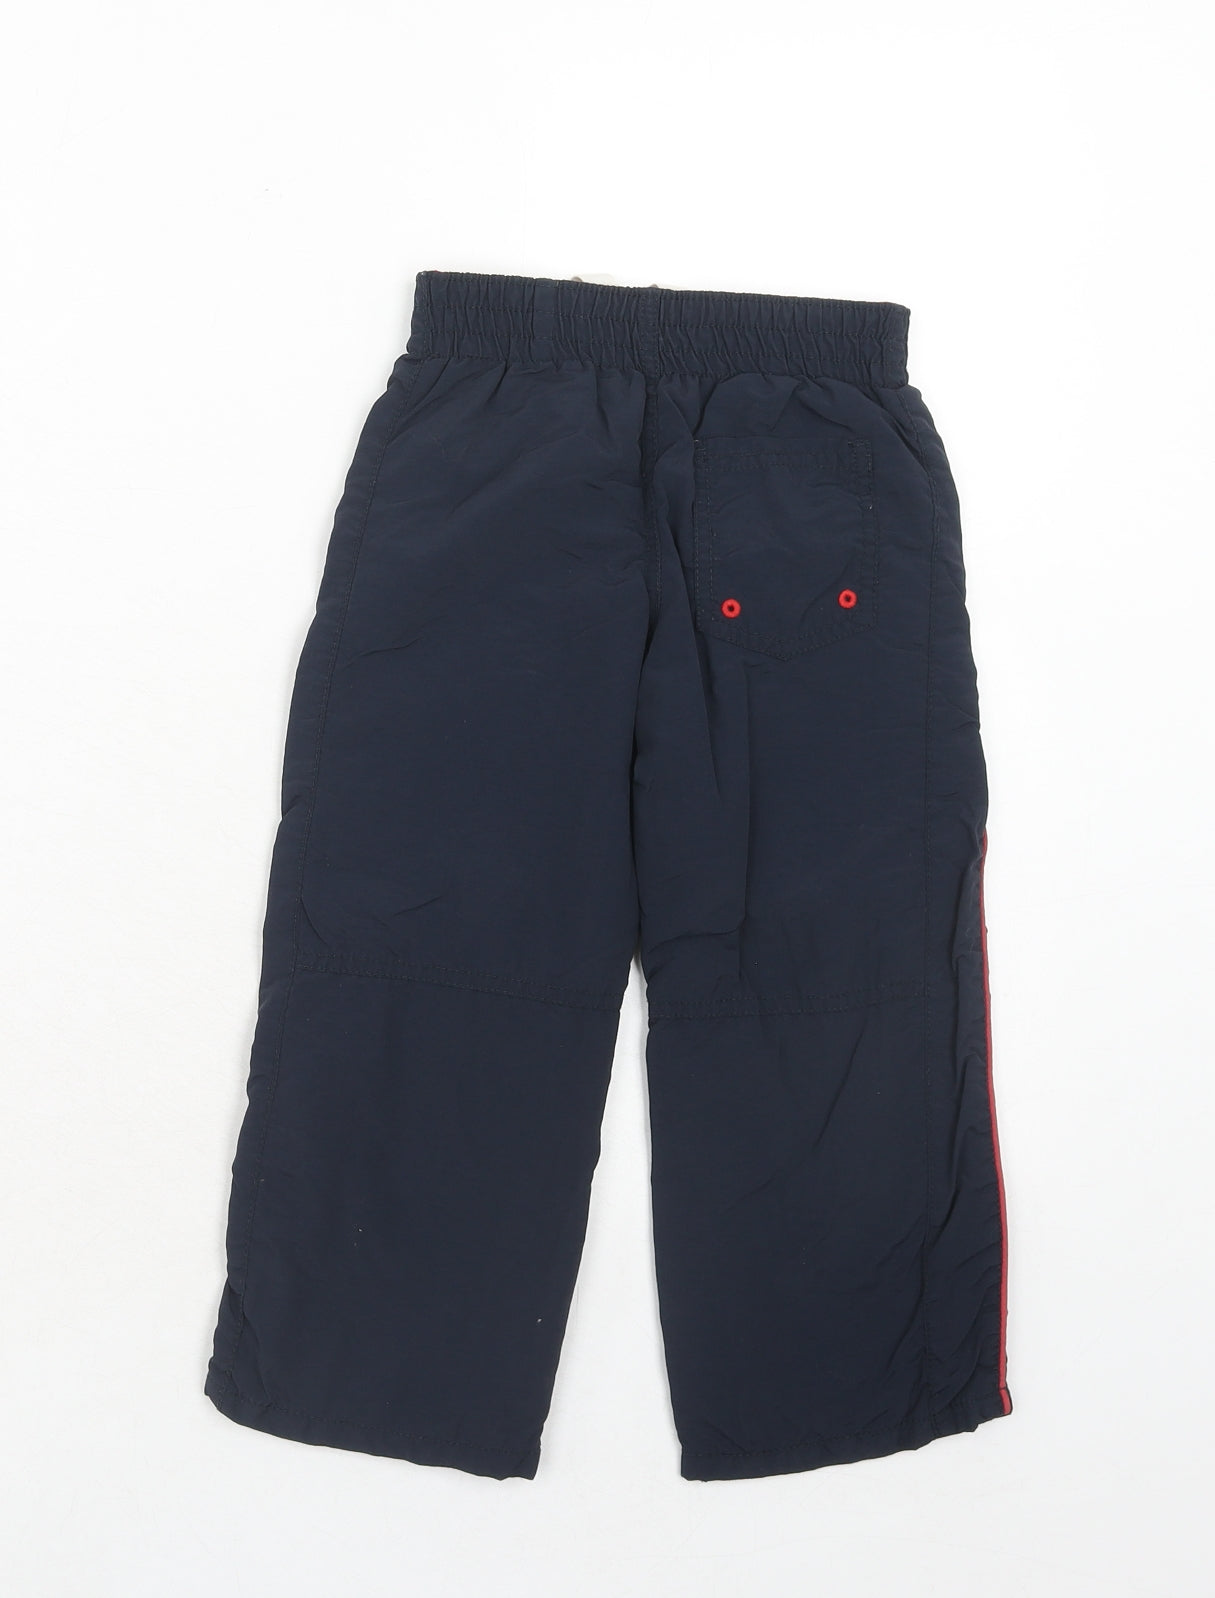 Marks and Spencer Boys Blue Polyamide Windbreaker Trousers Size 3-4 Years Regular Drawstring